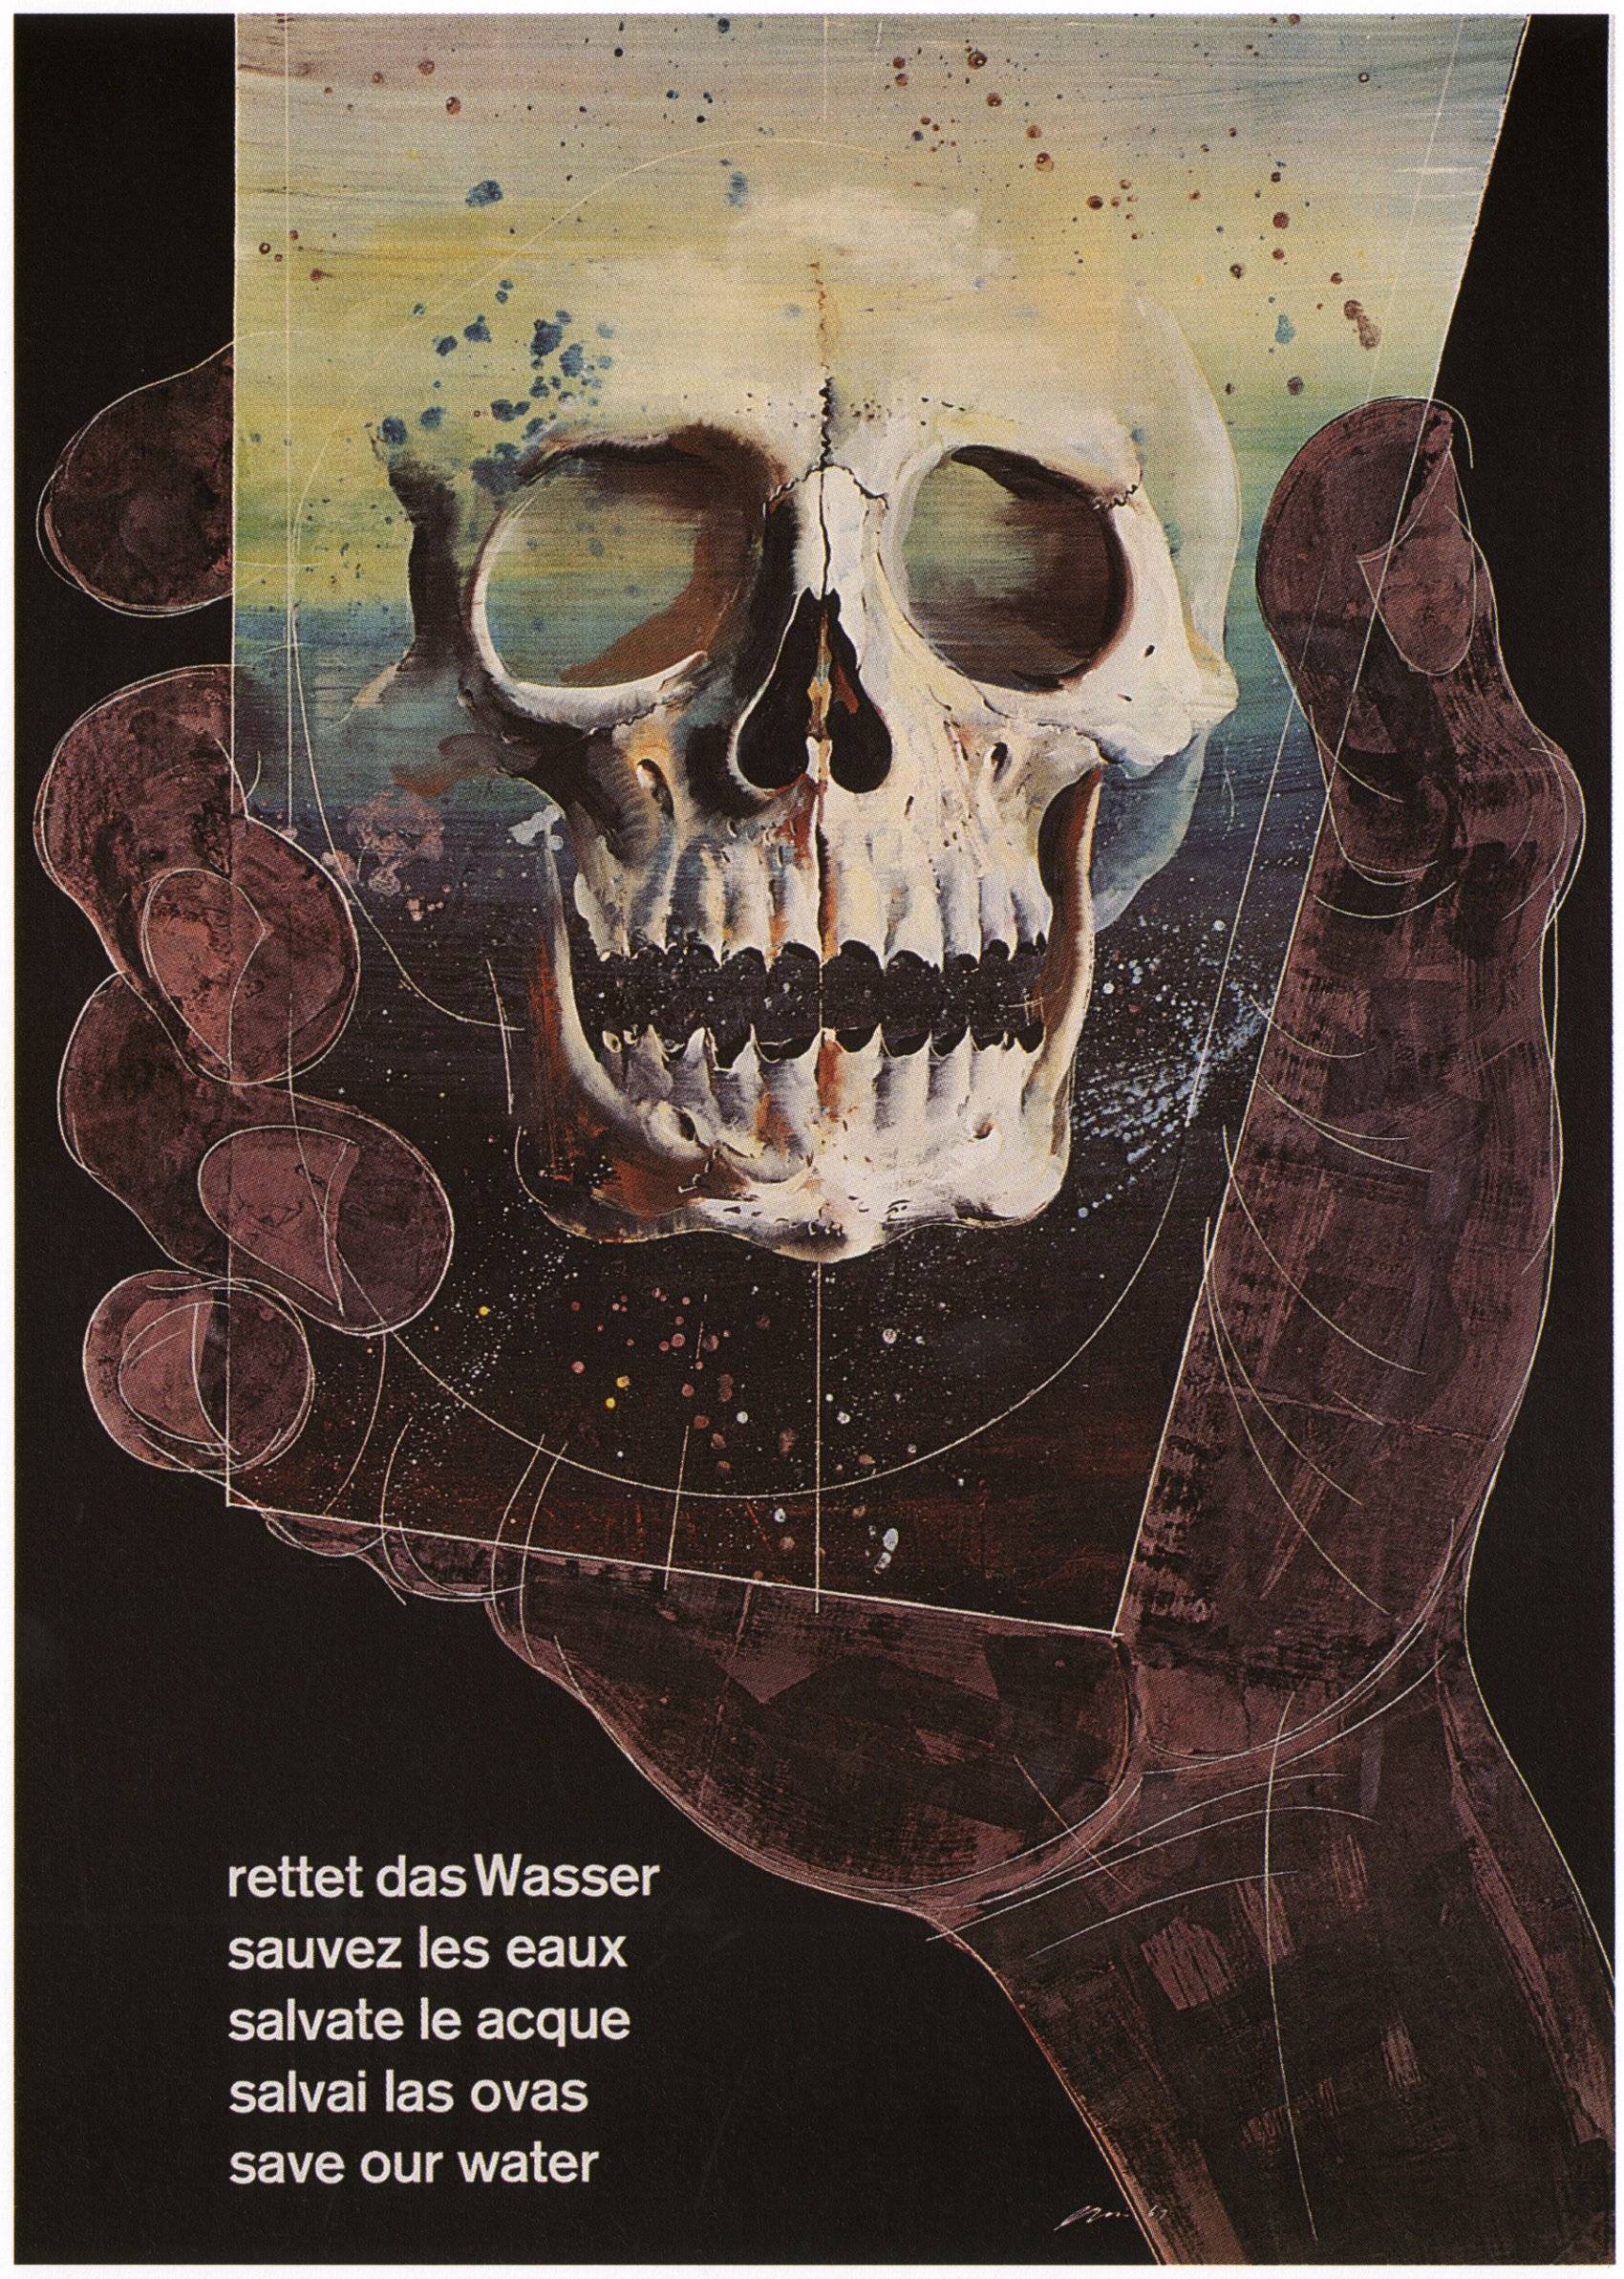 illustrational poster of a hand holding up the image of a skull